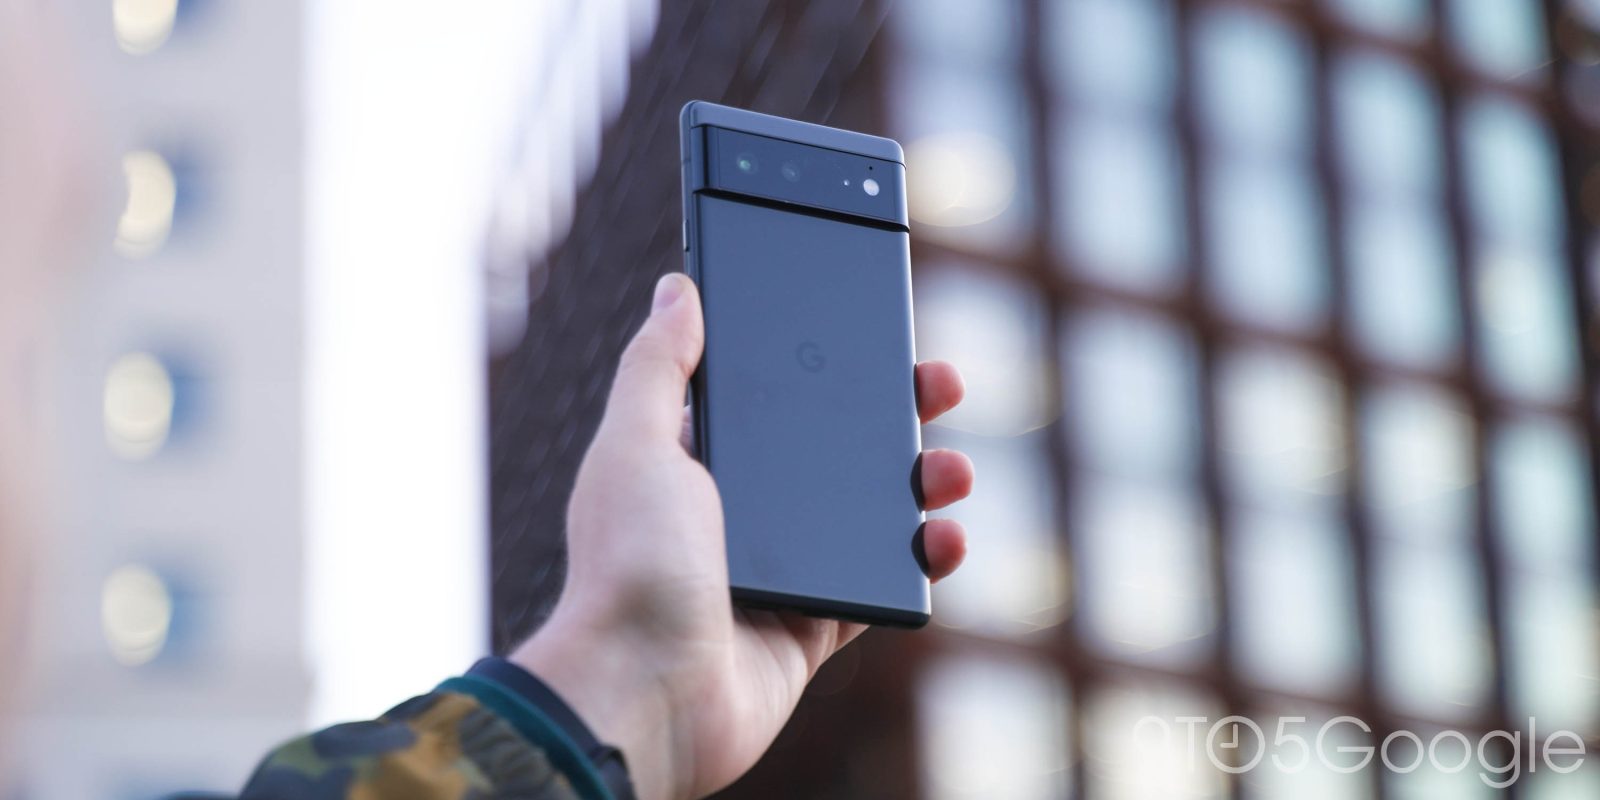 Google Pixel 6 in Stormy Black, held by an upraised hand